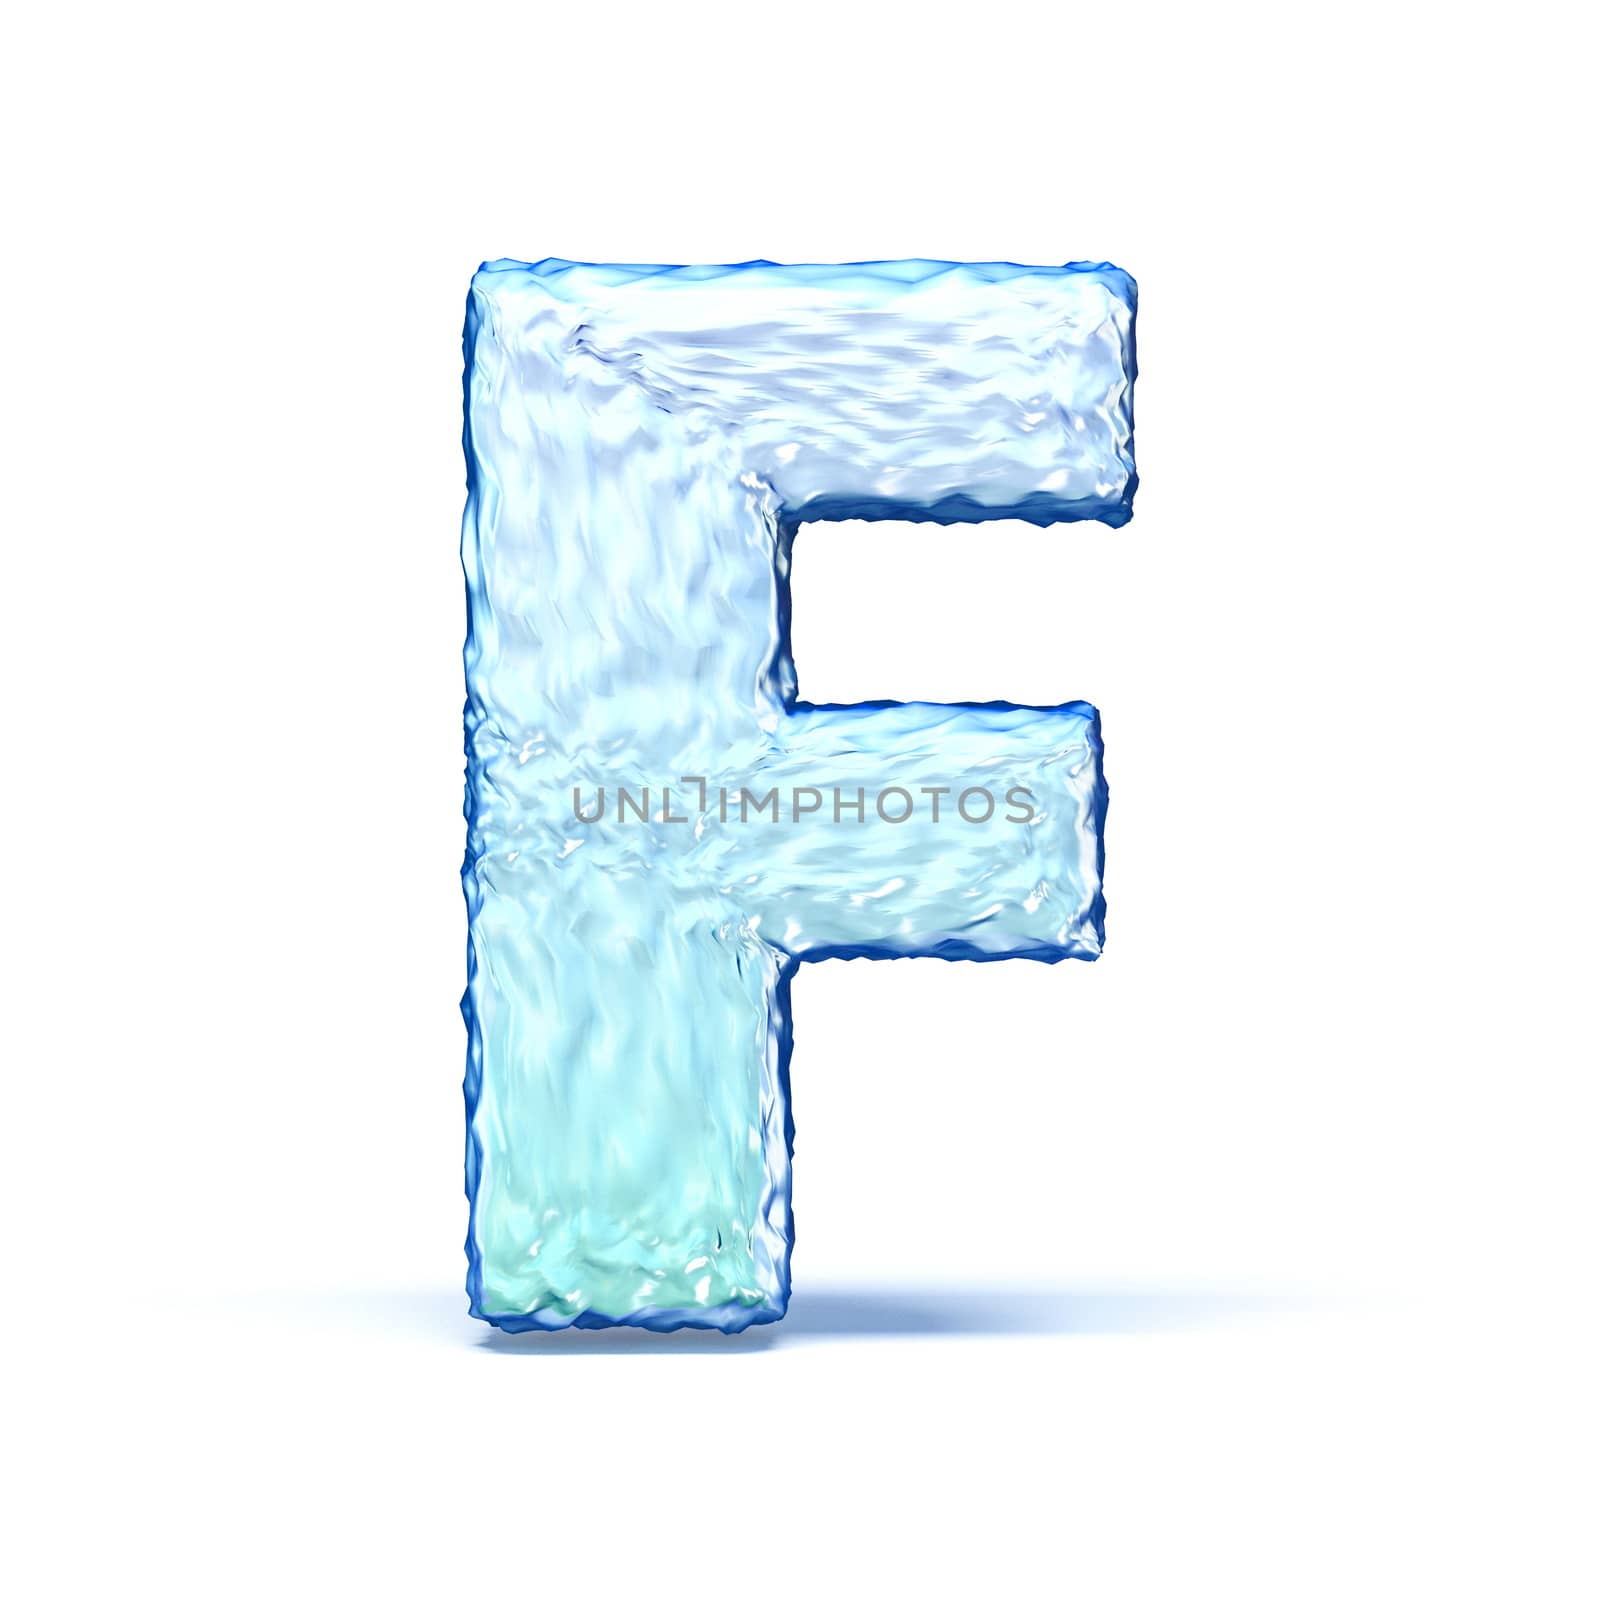 Ice crystal font letter F 3D render illustration isolated on white background